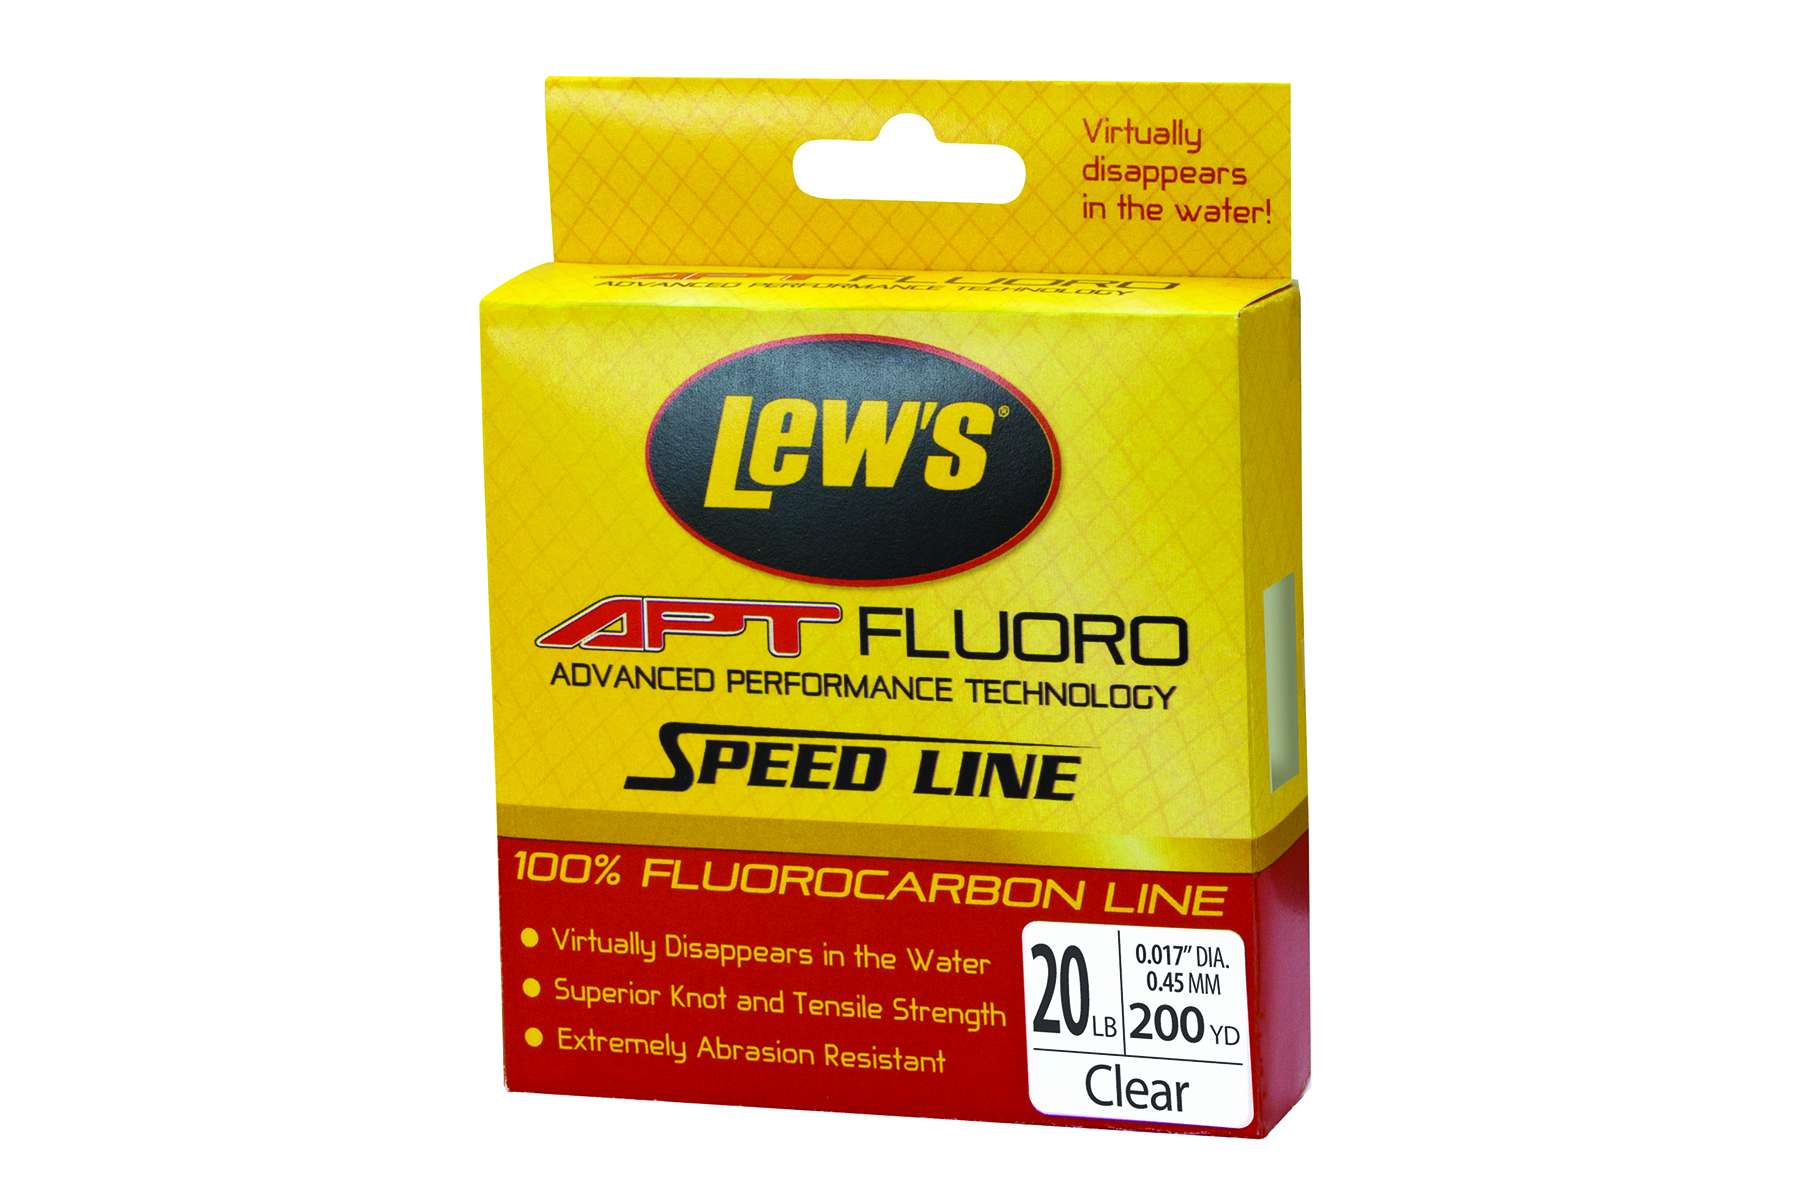 <b>Lew's</b><br>	APT Fluorocarbon Speed Fishing Line<br>				Lew's Fluorocarbon Speed Line casts and handles like a premium monofilament, yet it's incredibly strong and tough with high abrasion resistance properties. Available in Transparent Clear, the standard filler spool is 200 yards. Lew's Fluorocarbon is available in 6, 8, 10, 12, 14, 17, 20 and 25 pound test line sizes.